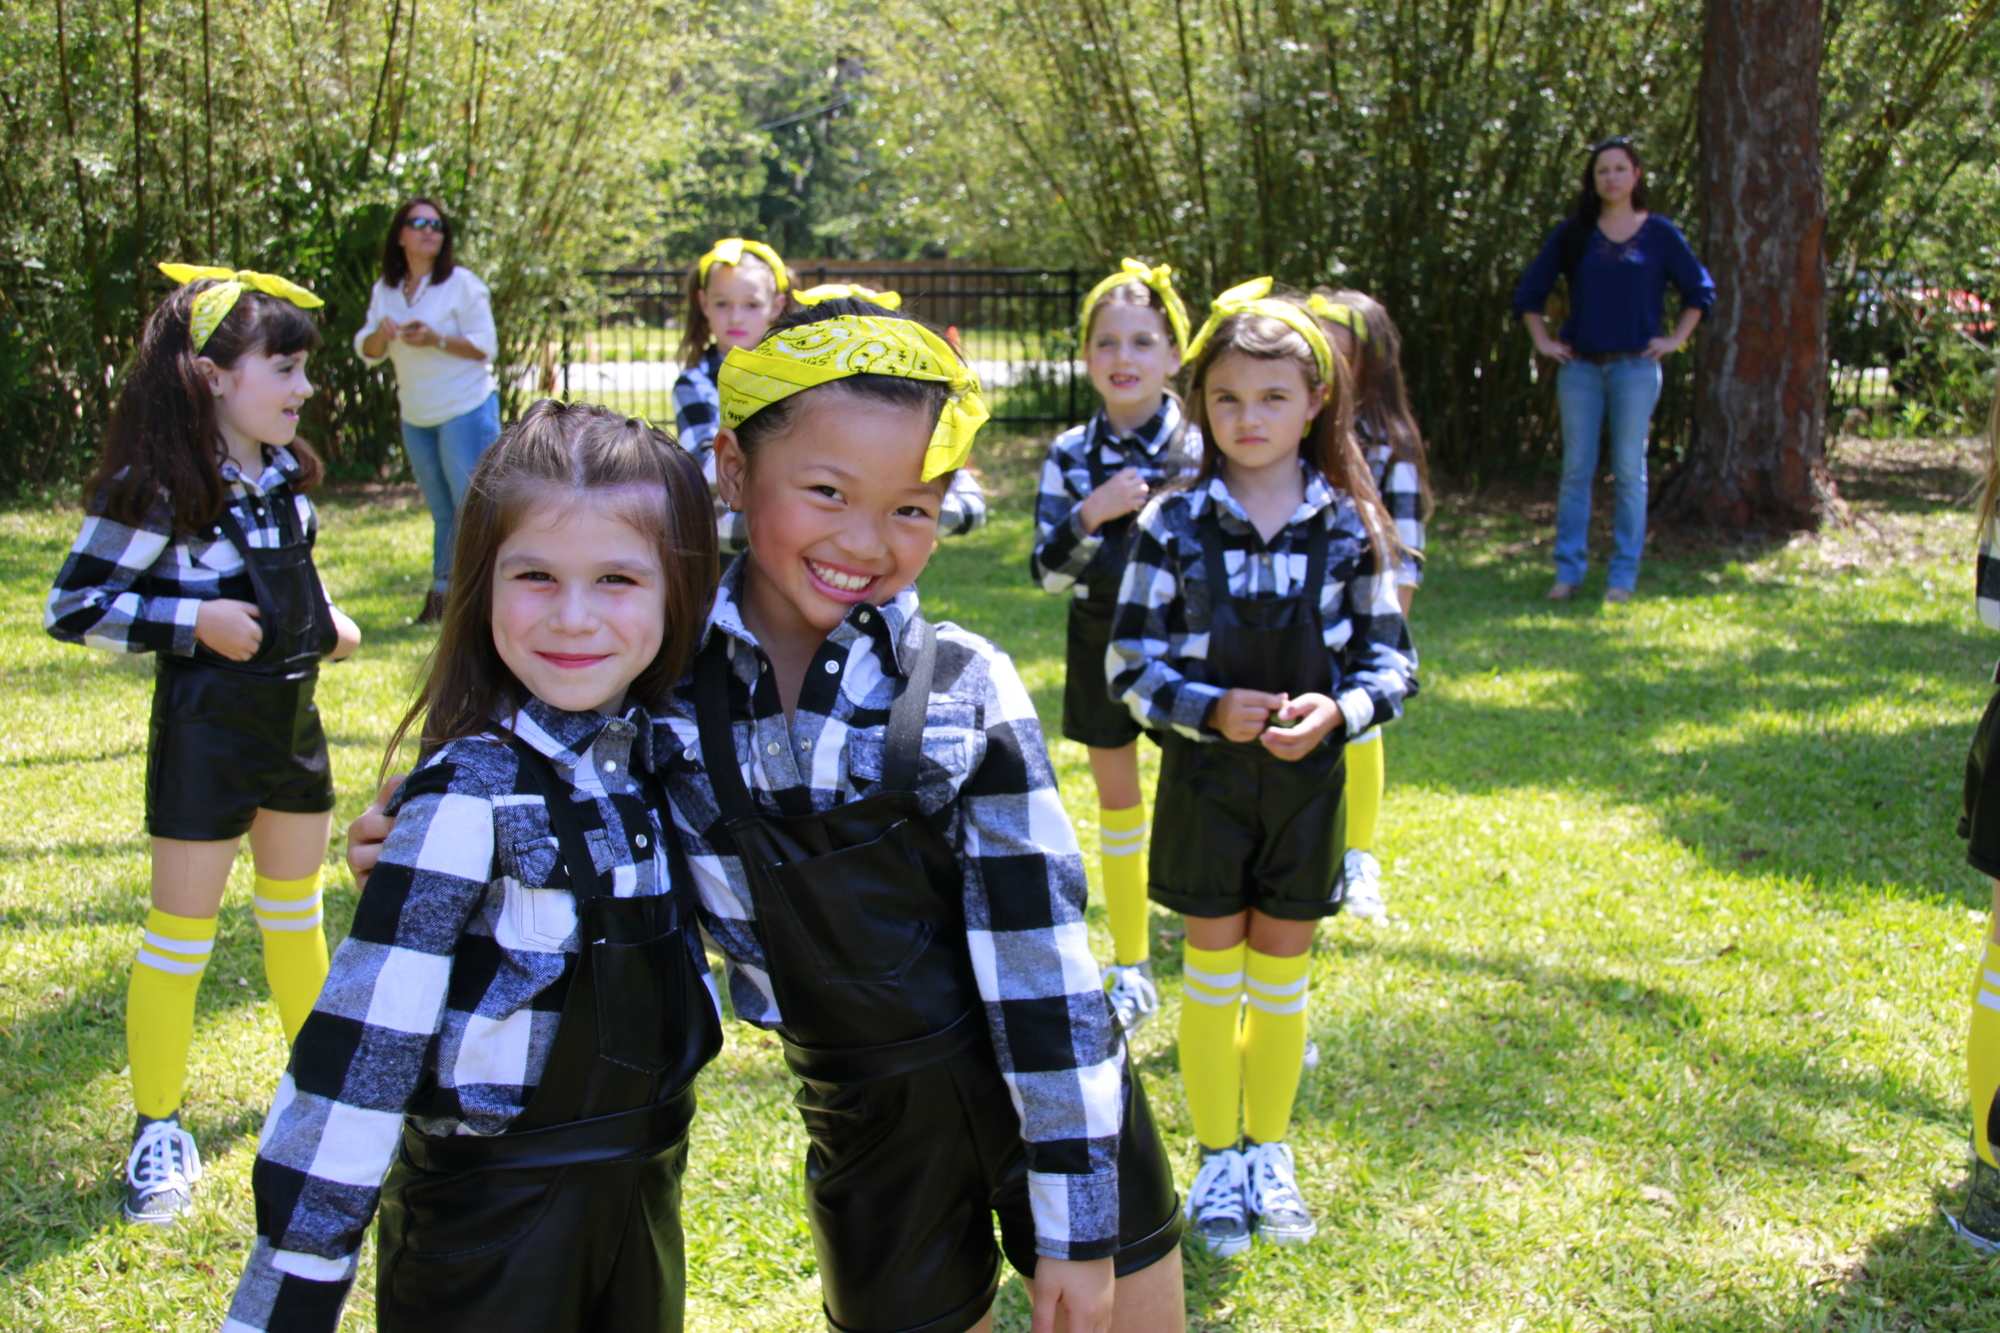 OKES dancers Bailey Hoffman and Bella Nong pose at the Earth Day celebration at Washington Oaks Gardens State Park. Photo courtesy of Rodney Harshbarger